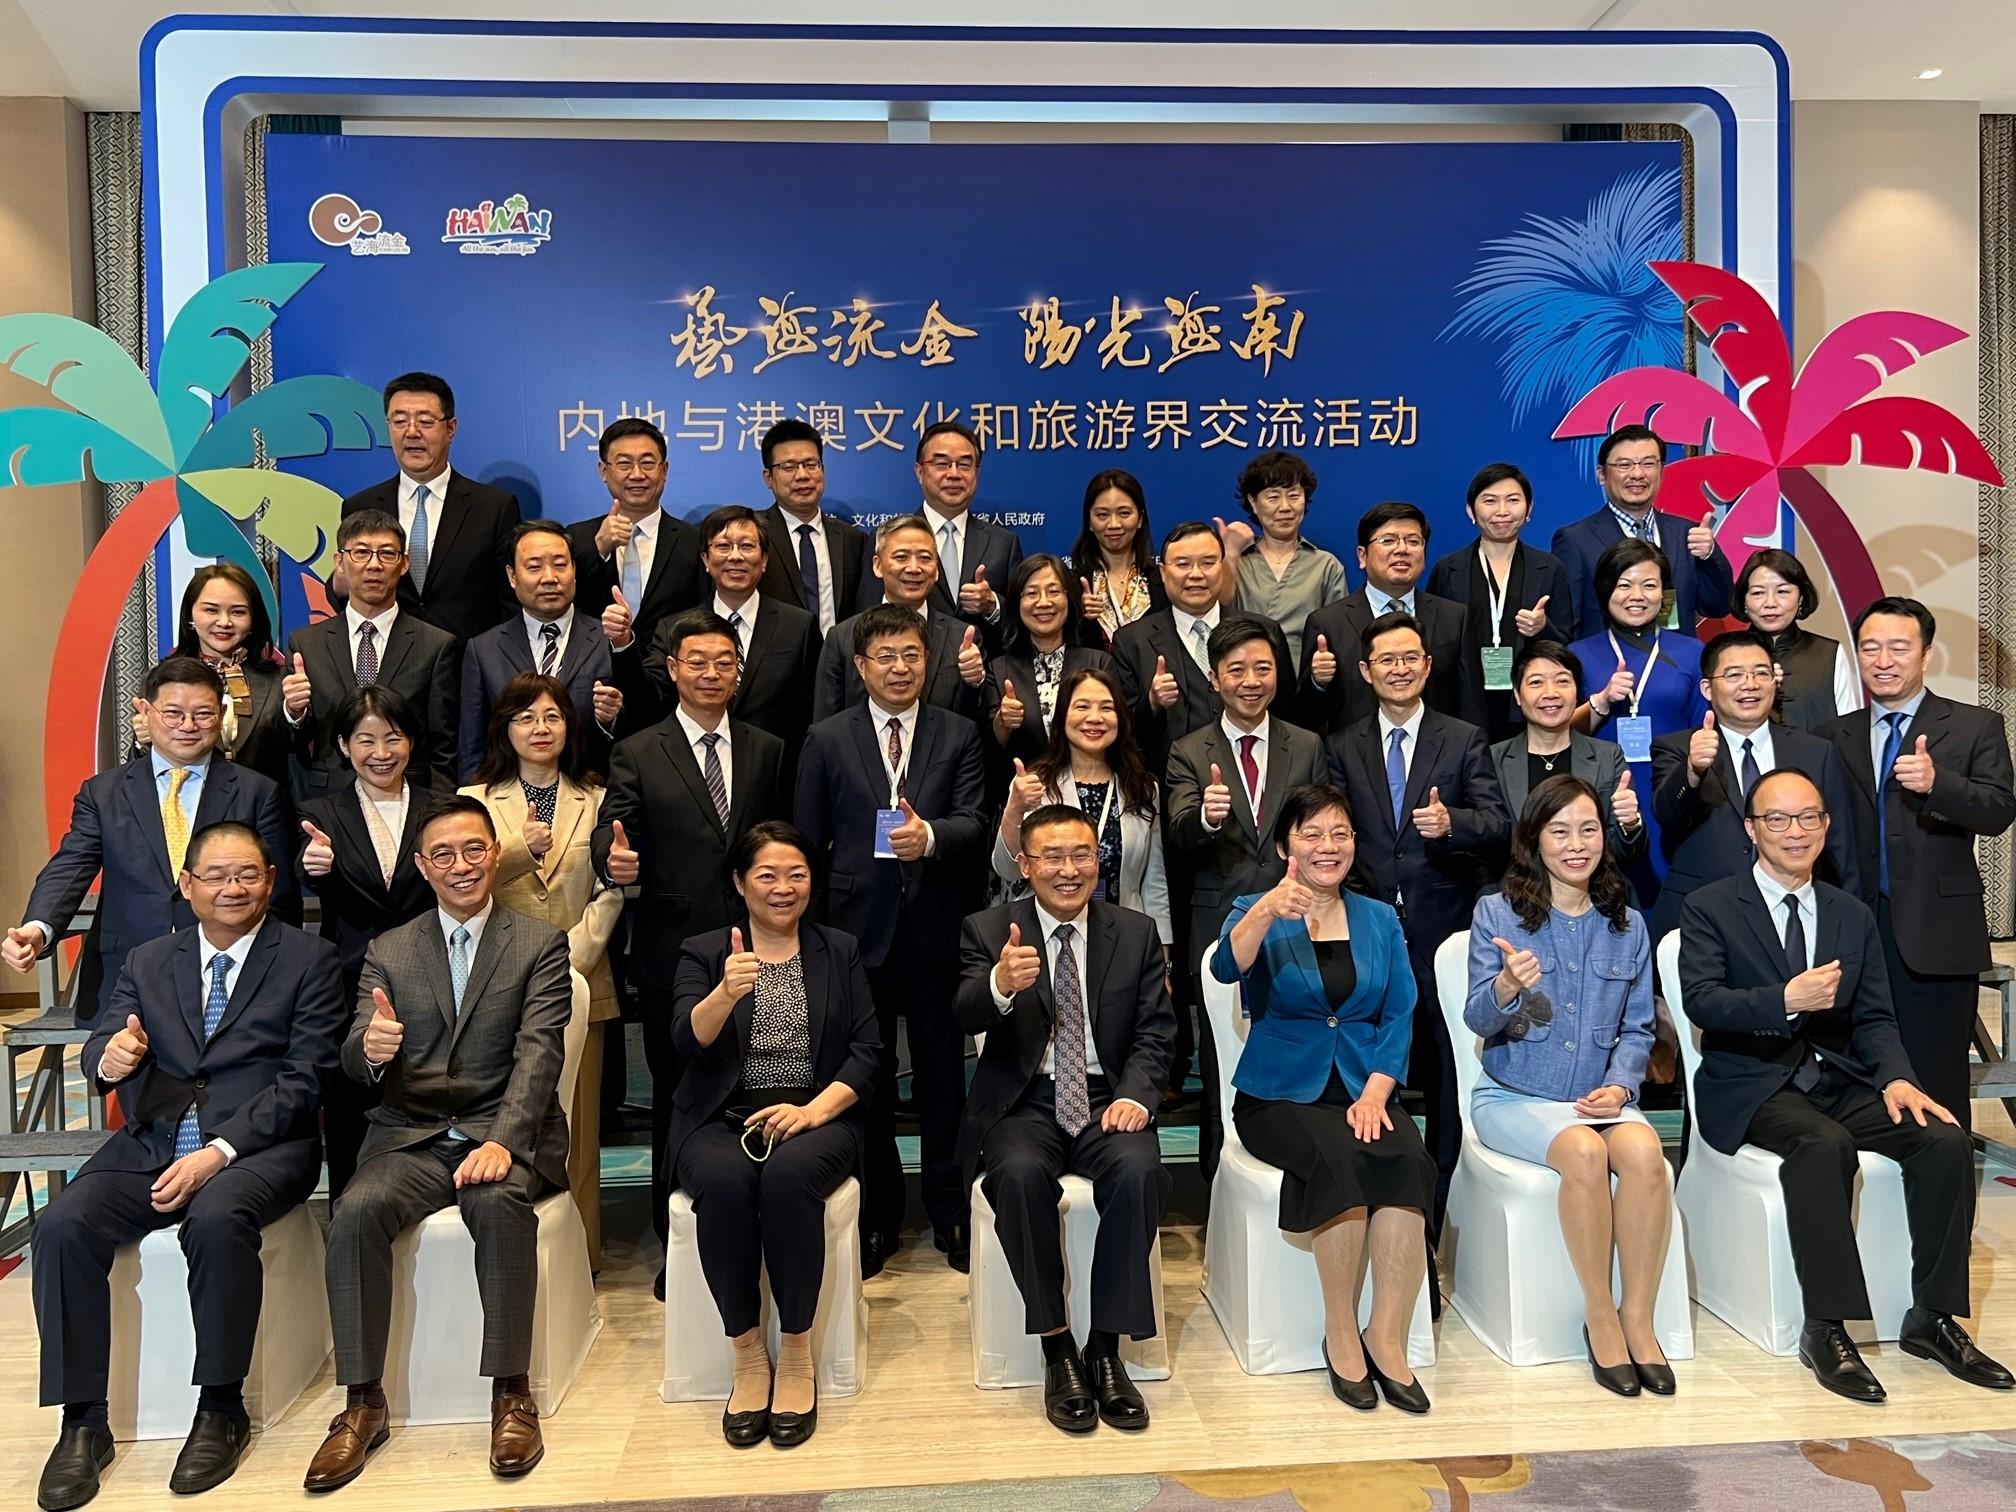 The Secretary for Culture, Sports and Tourism, Mr Kevin Yeung (front row, second left), today (May 8) attended a seminar with the Ministry of Culture and Tourism, leaders of Hainan Province and representatives from Hong Kong and Macao. Photo shows attendees including Vice Minister of Culture and Tourism Mr Lu Yingchuan (front row, centre), Vice-governor of Hainan Province Ms Xie Jing (front row, third right), Deputy Director of the Liaison Office of the Central People's Government in the Macao Special Administrative Region Ms Yan Zhichan (front row, third left) and the Secretary for Social Affairs and Culture of the Macao Special Administrative Region Government, Ms Ao Ieong U (front row, second right).